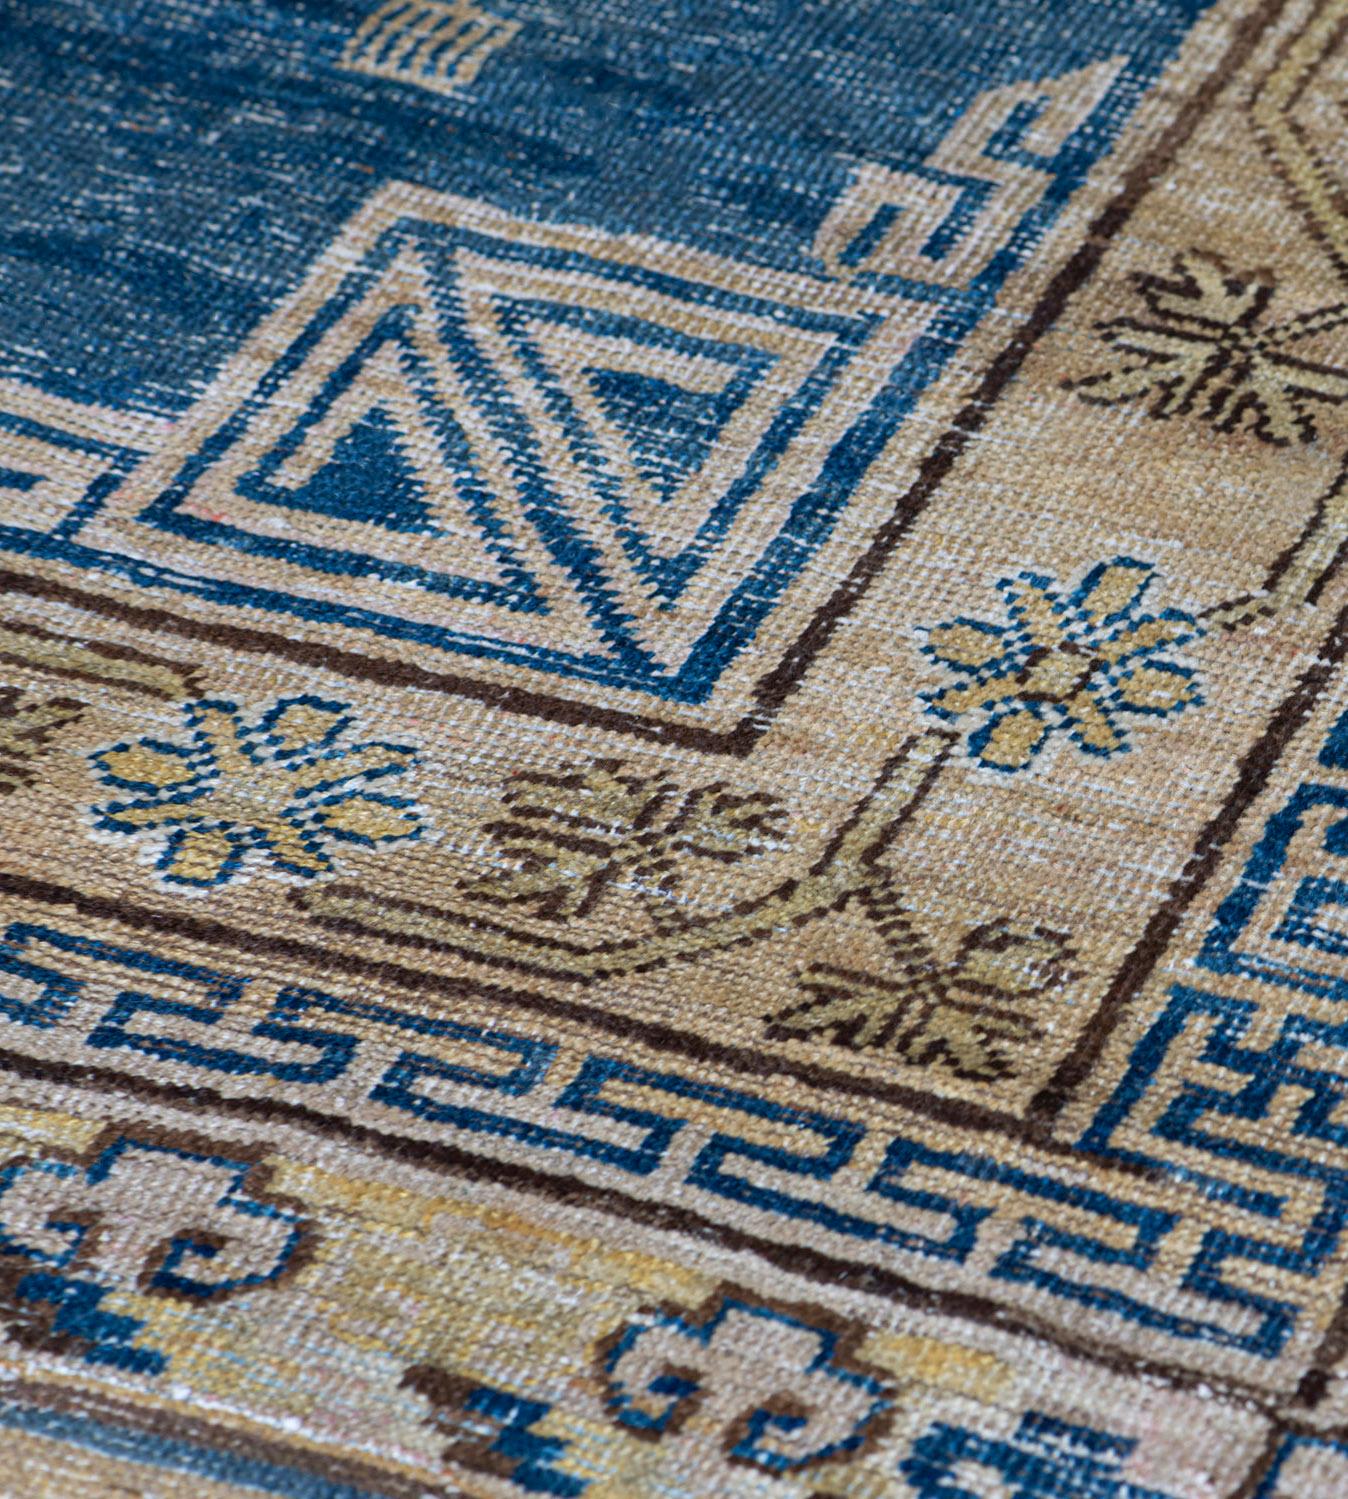 This traditional Khotan rug has a shaded blue field scattered with floral sprays and hooked lozenges together with floral vases and other auspicious motifs around a column of three beige roundels containing an outer band of rosettes and stellar